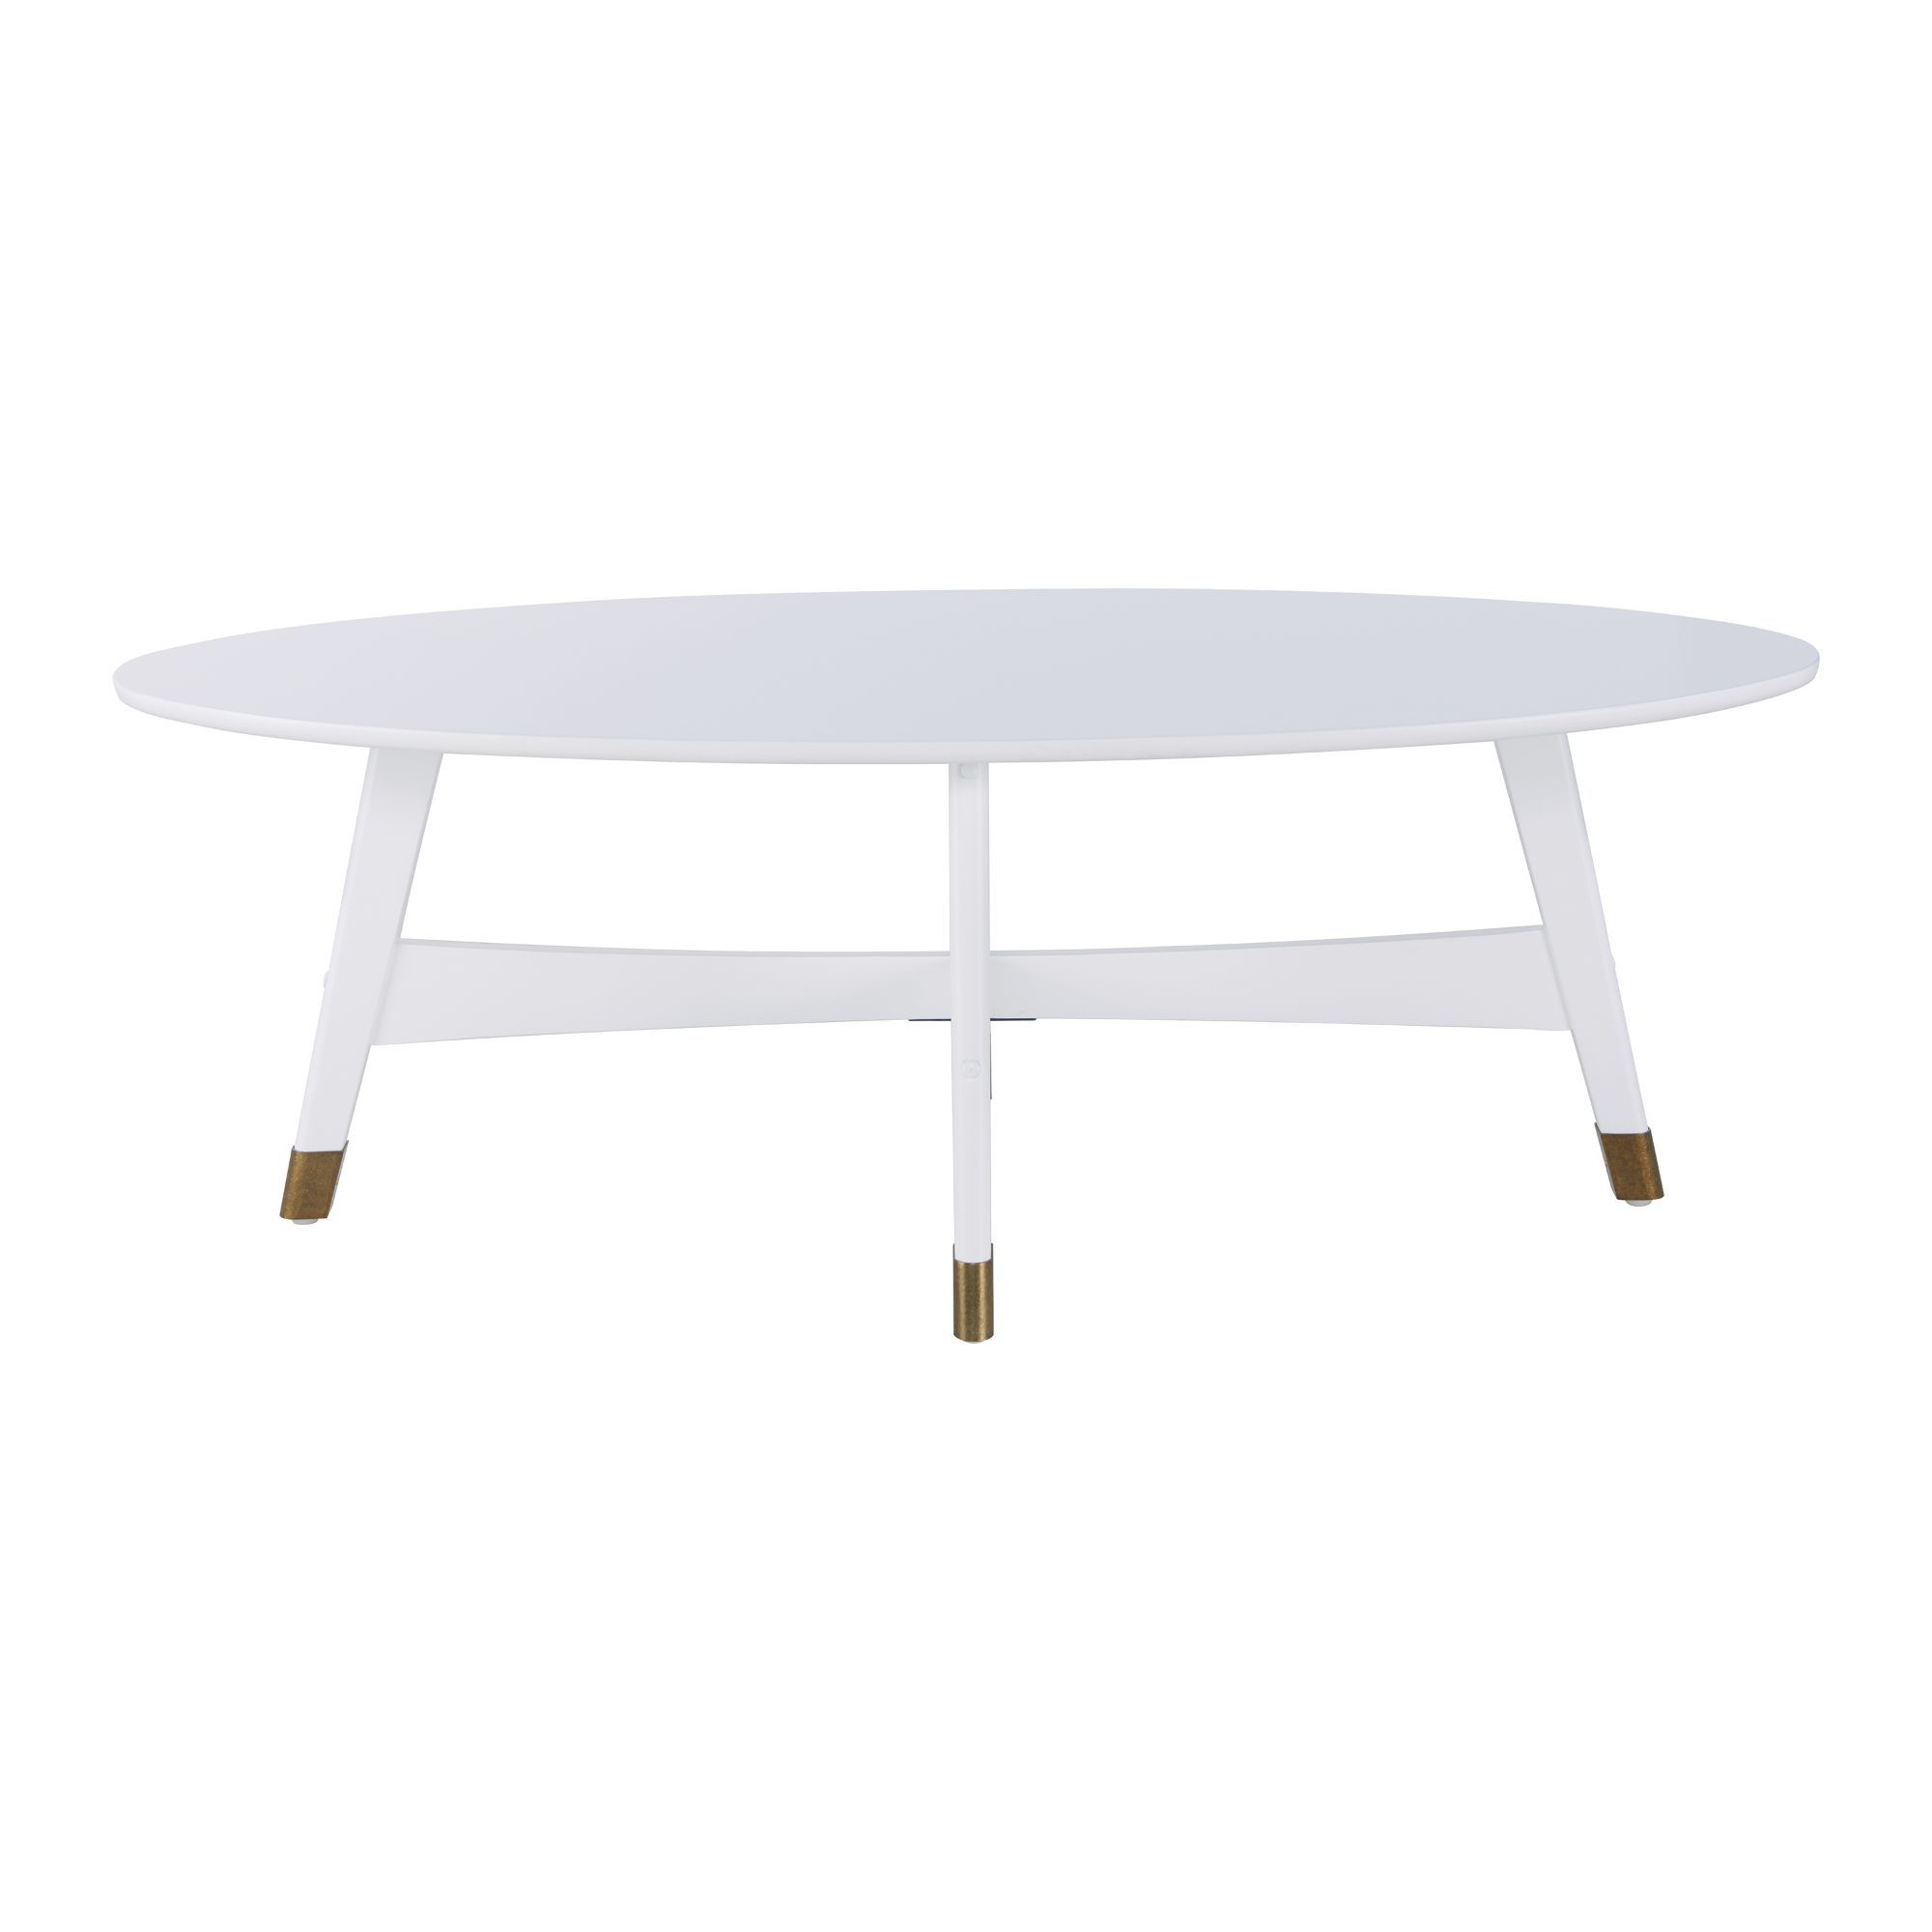 52" White And Gold Solid Oval Cocktail Table With Metal With Famous Gold Cocktail Tables (View 9 of 20)